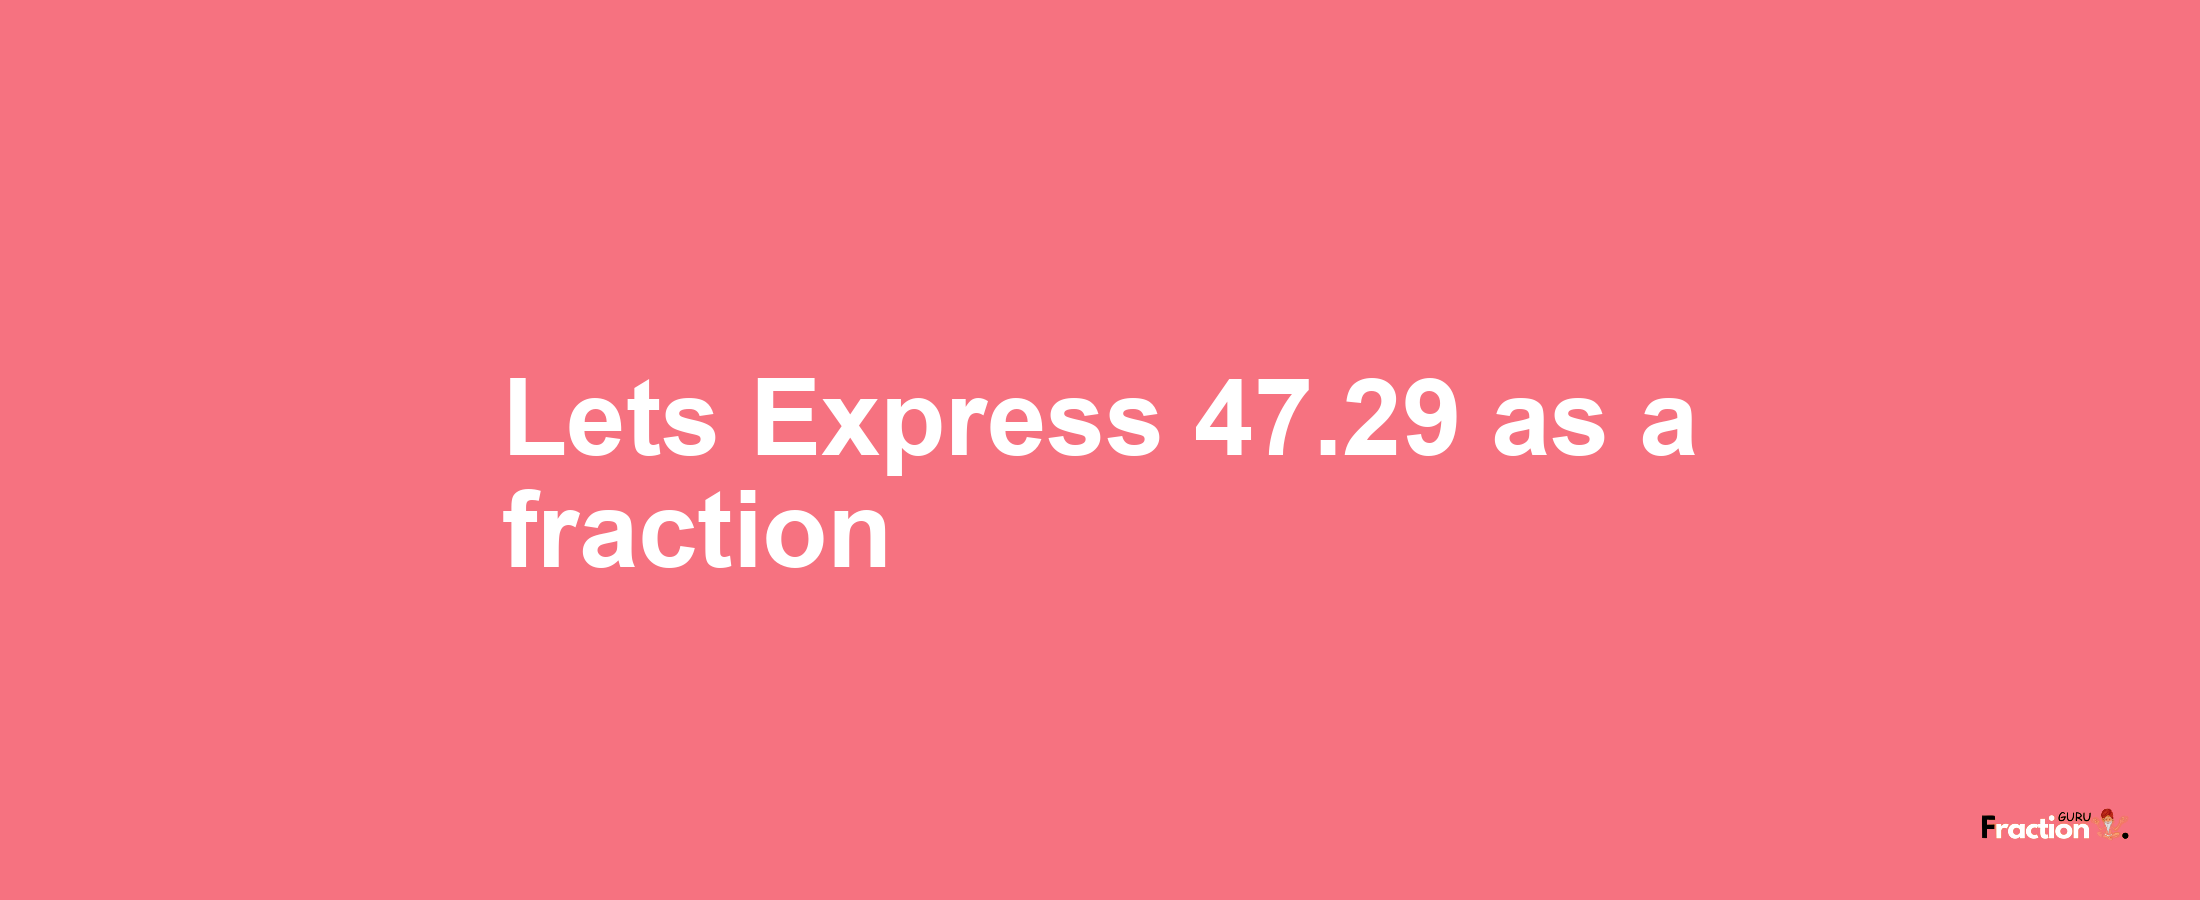 Lets Express 47.29 as afraction